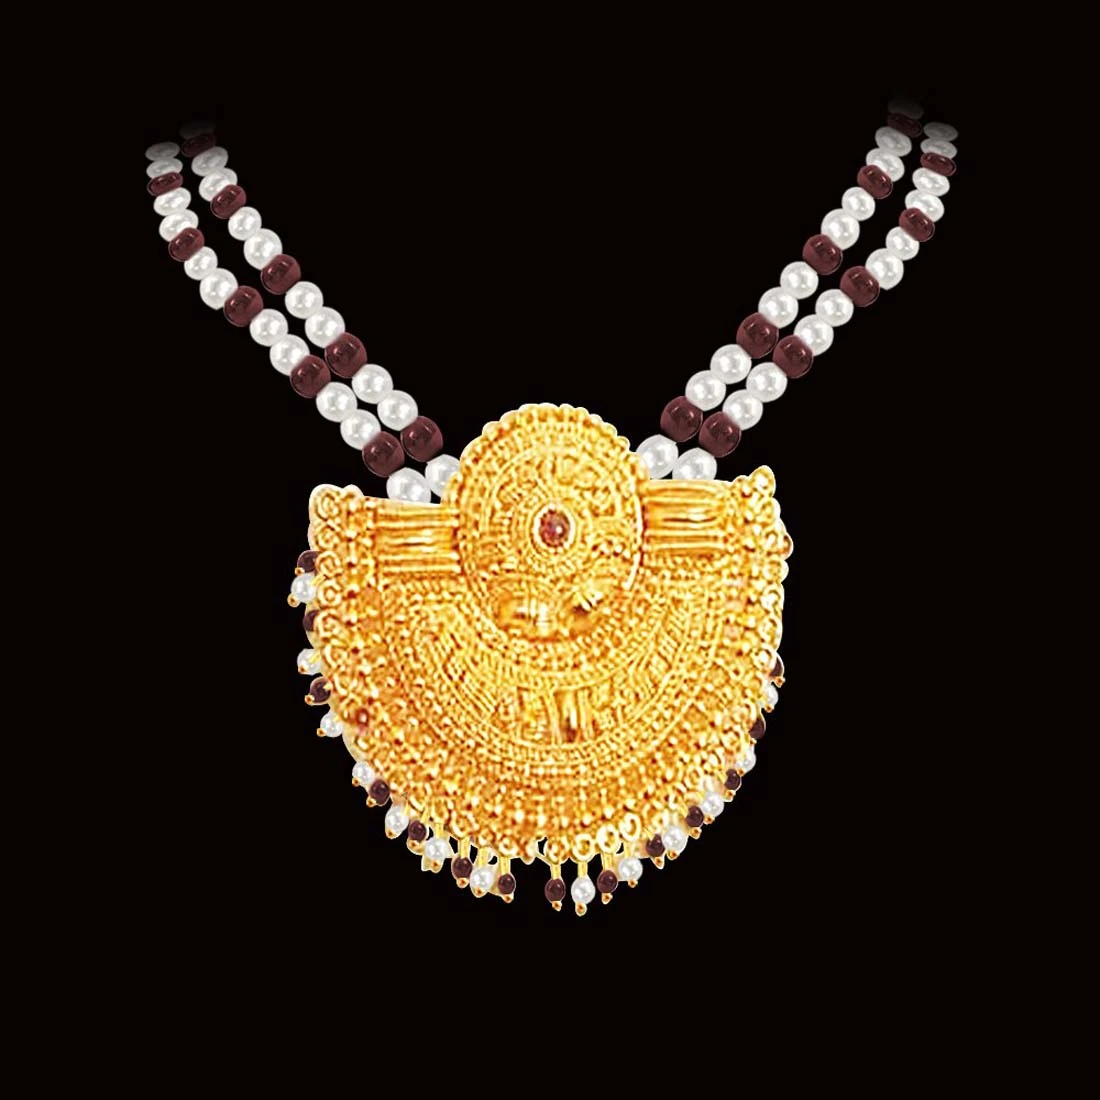 Extraordinary Love - Gold Plated Temple Design Pendant & 3 Line Freshwater Pearl & Garnet Beads Necklace for Women (SNP3)